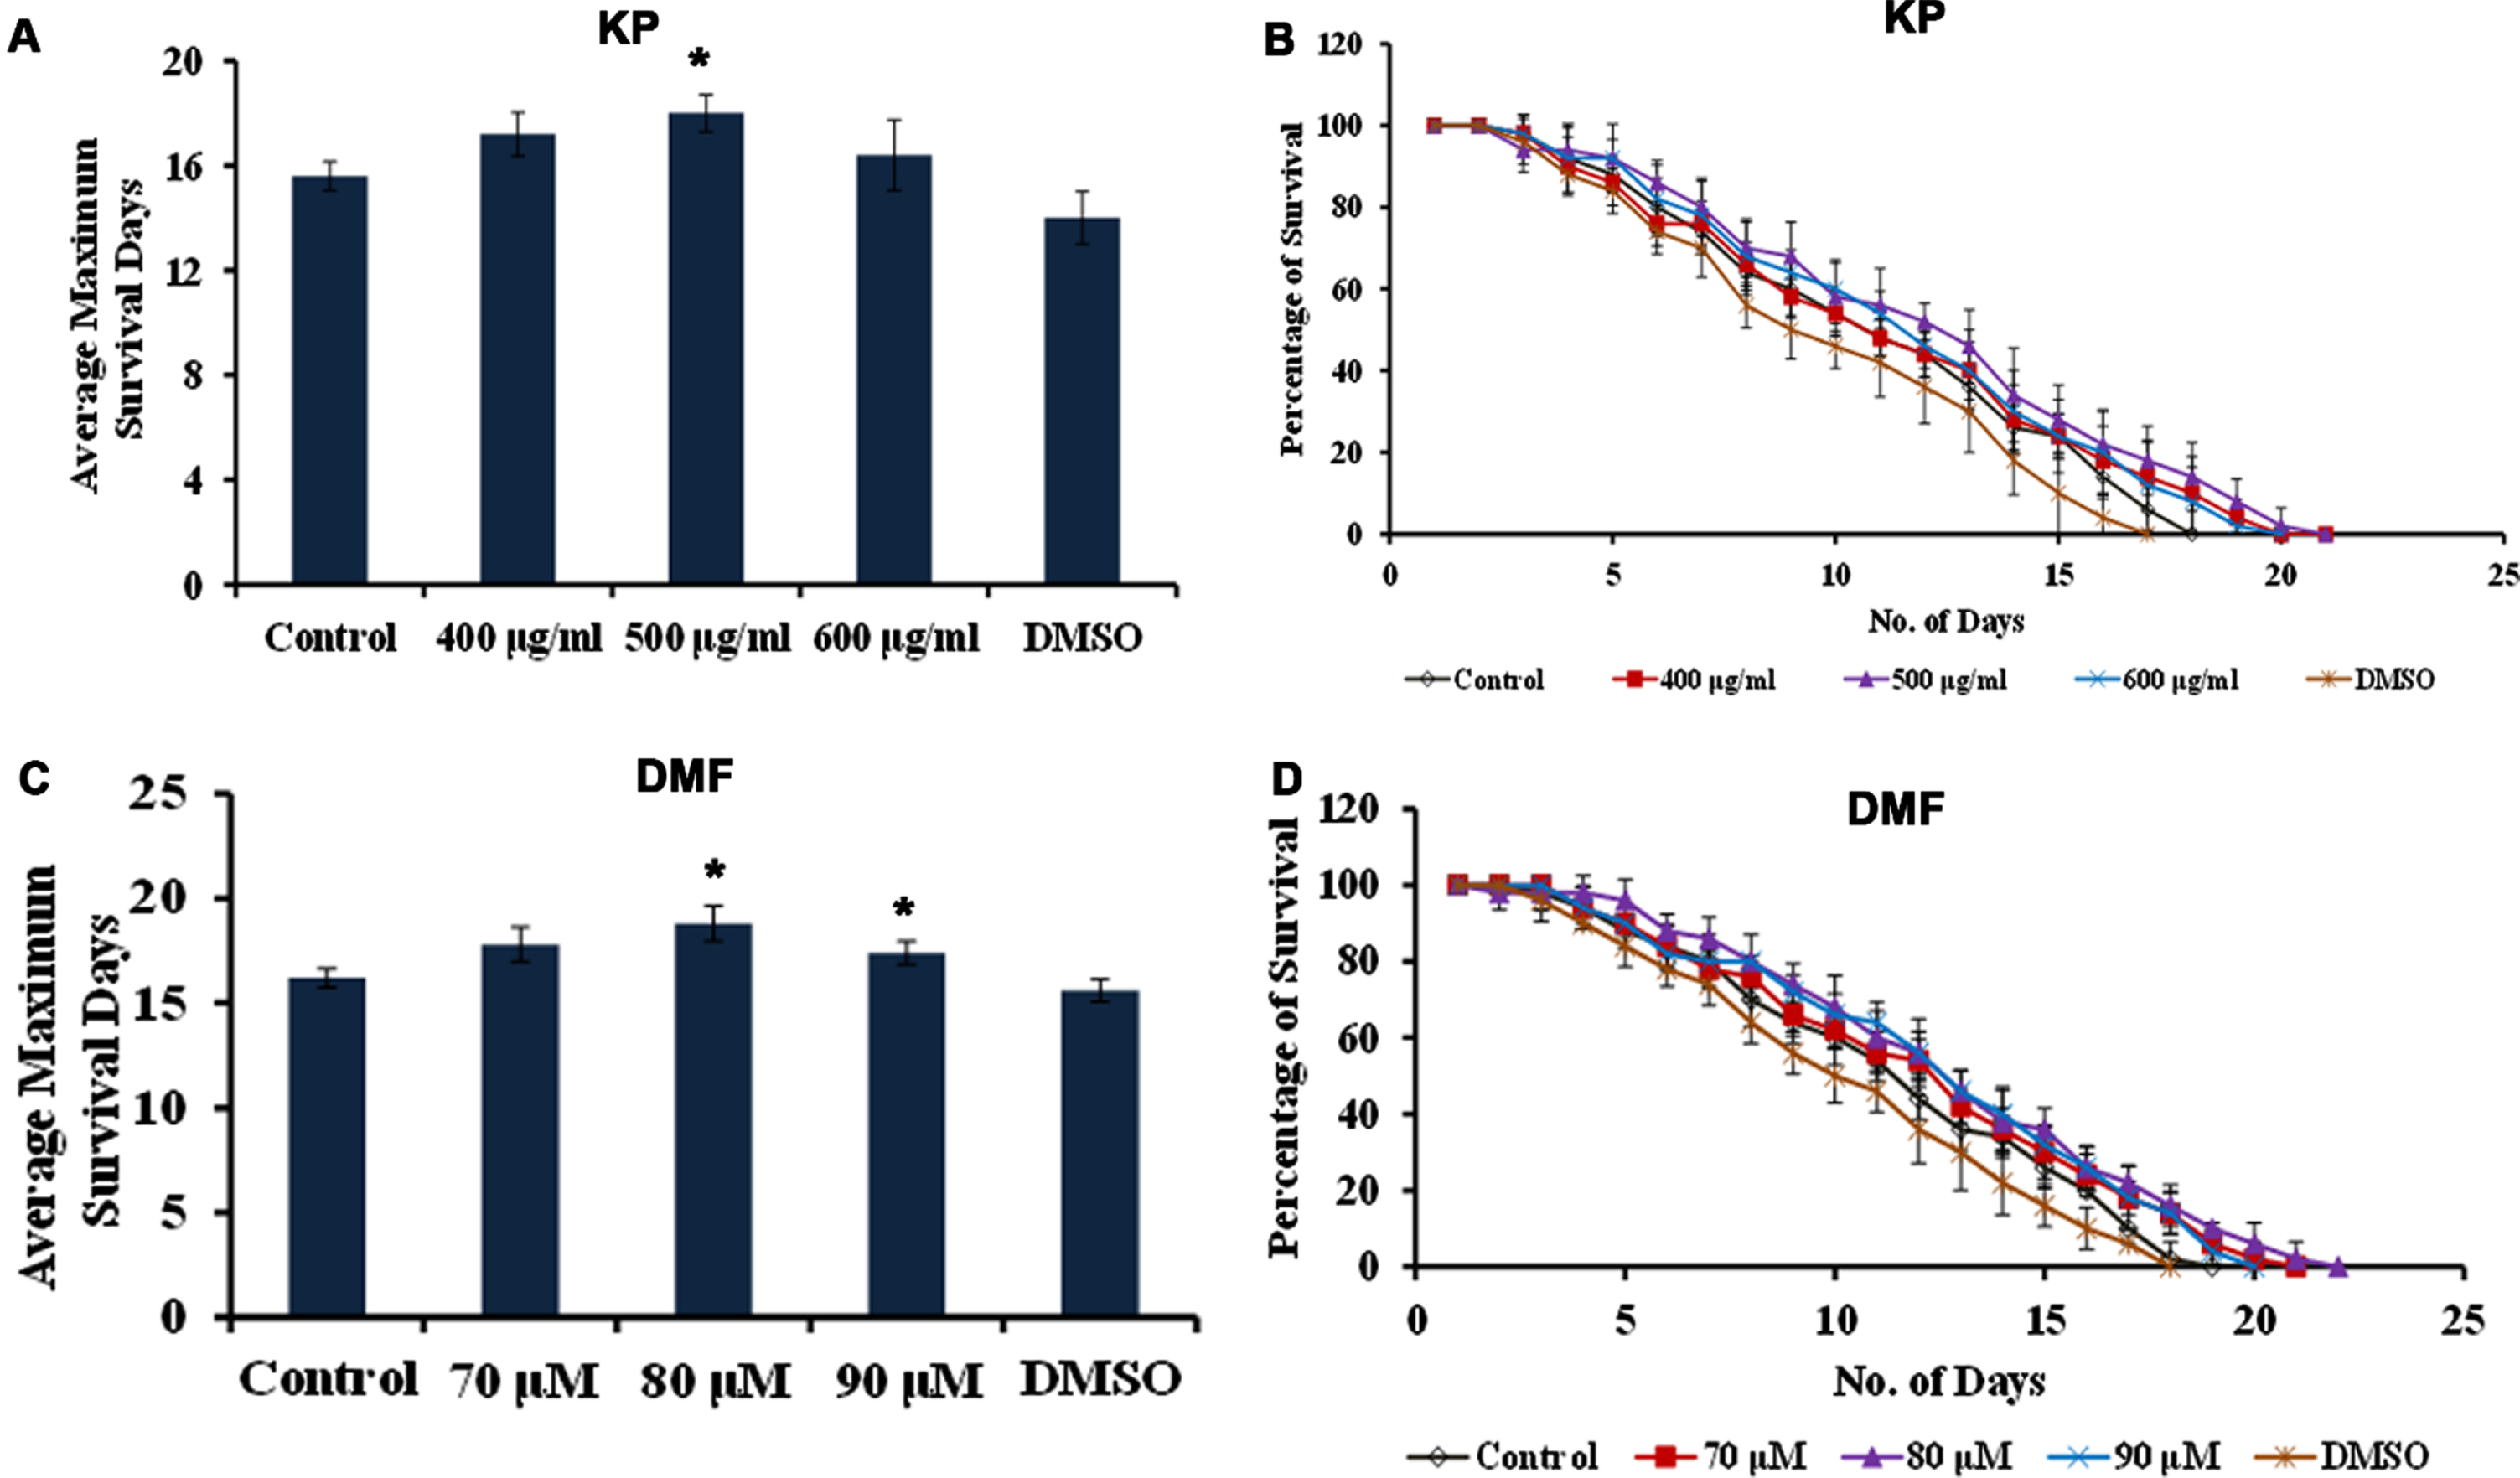 KP and DMF can impart neuroprotection in Aβ transgenic strain CL2006 (A) Maximum lifespan upon treatment with 400 –600μg/ml KP, wherein 500μg/ml exhibited significant (p <  0.05) extension of lifespan when compared to control (B) KP extract (400 –600μg/ml) prolonged the lifespan in CL2006 nematodes to offer neuroprotection against Aβ expression (C) Maximum lifespan upon treatment with 70 –90μM DMF, wherein 80 –90μM exhibited significant (p <  0.05) extension of lifespan when compared to control (D) DMF (70 –90μM) prolonged the lifespan in CL2006 nematodes.